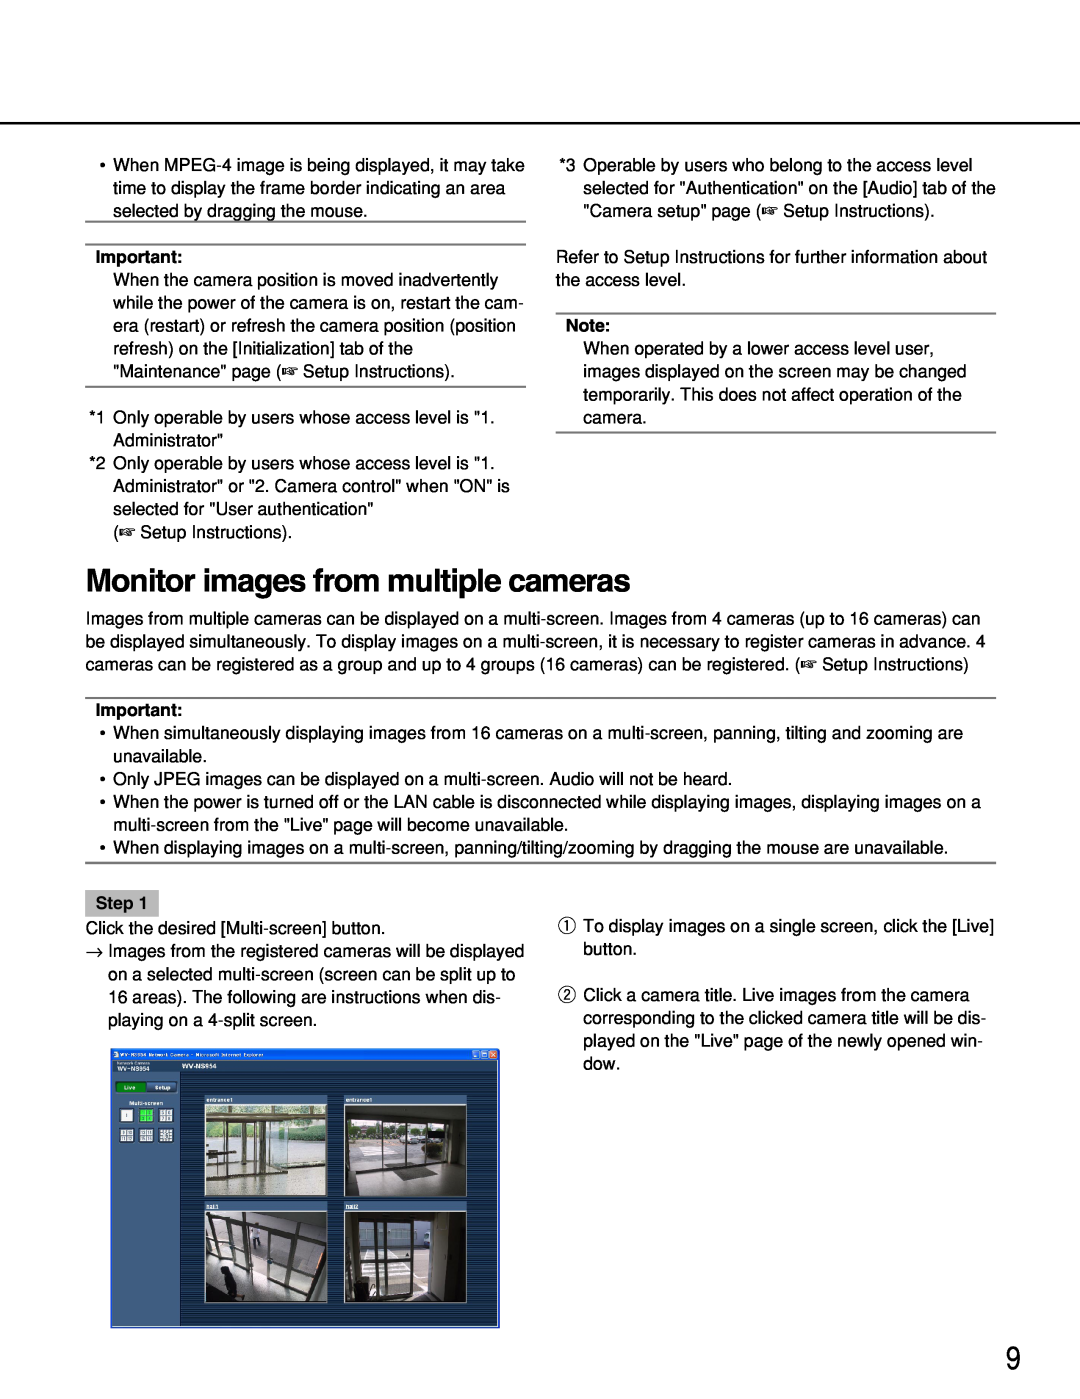 Panasonic WV-NS954, WV-NW964 operating instructions Monitor images from multiple cameras, Step 